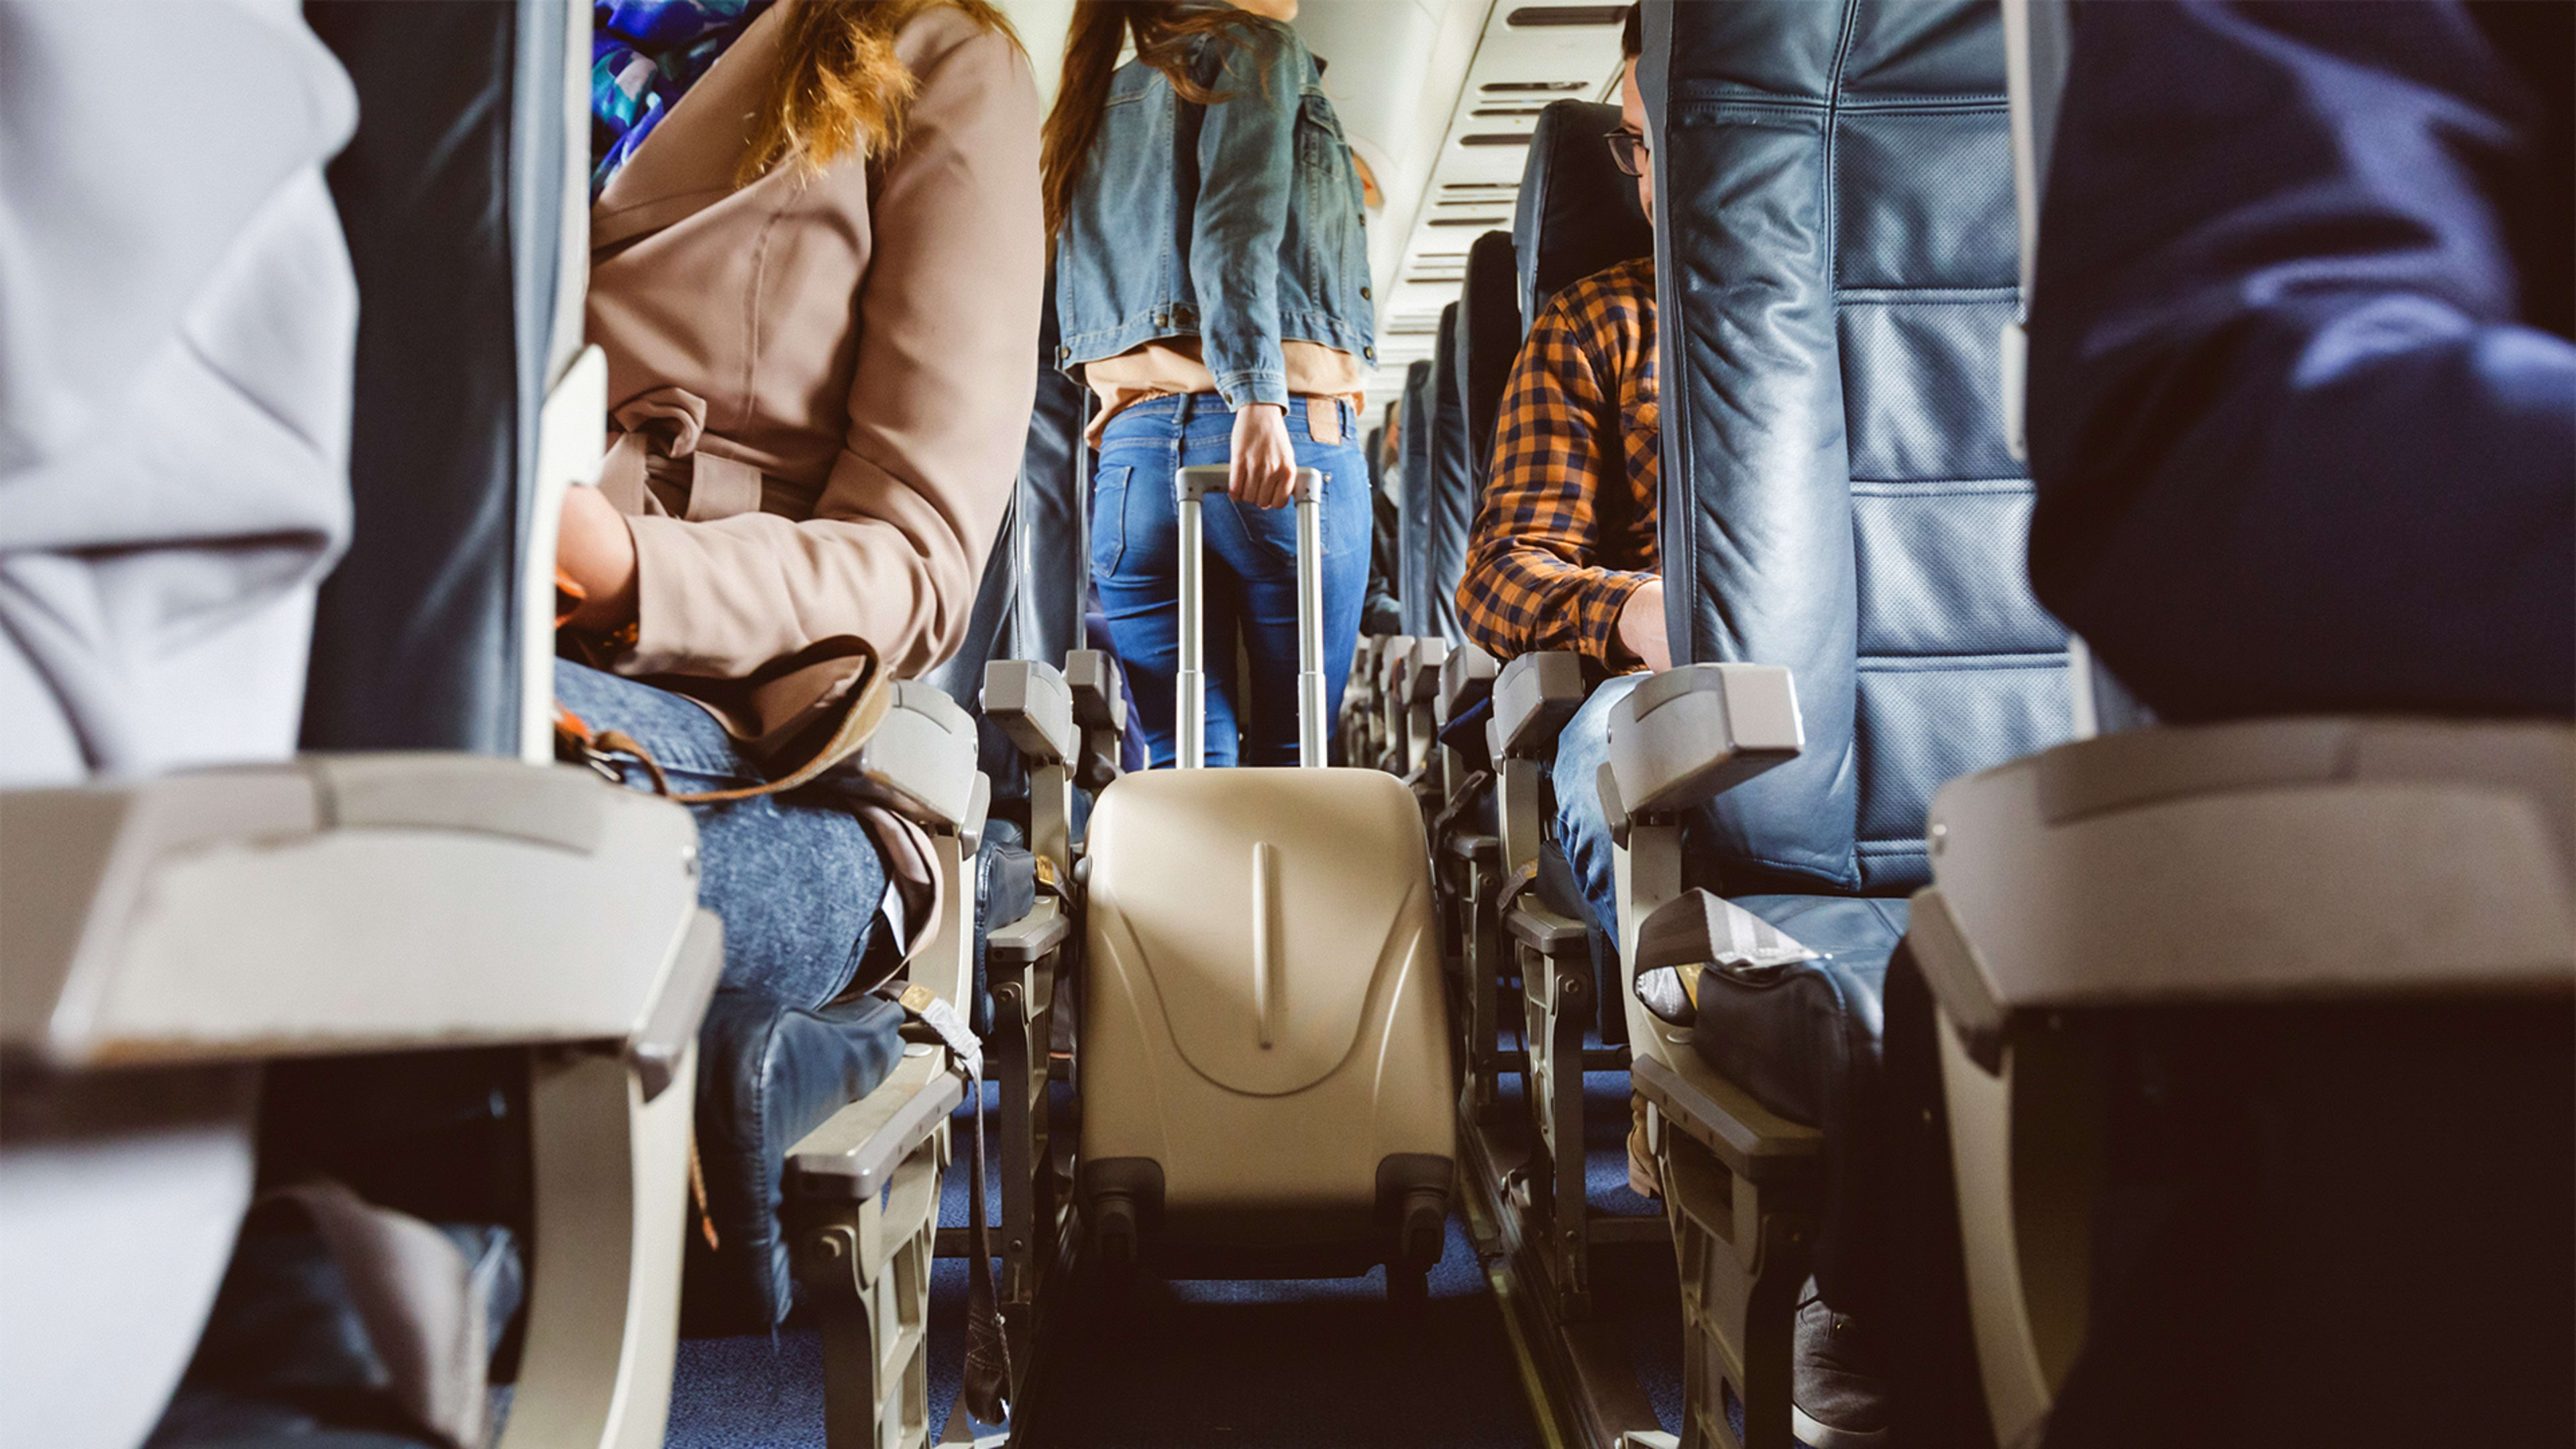 The Way We Board Planes Spreads More Disease